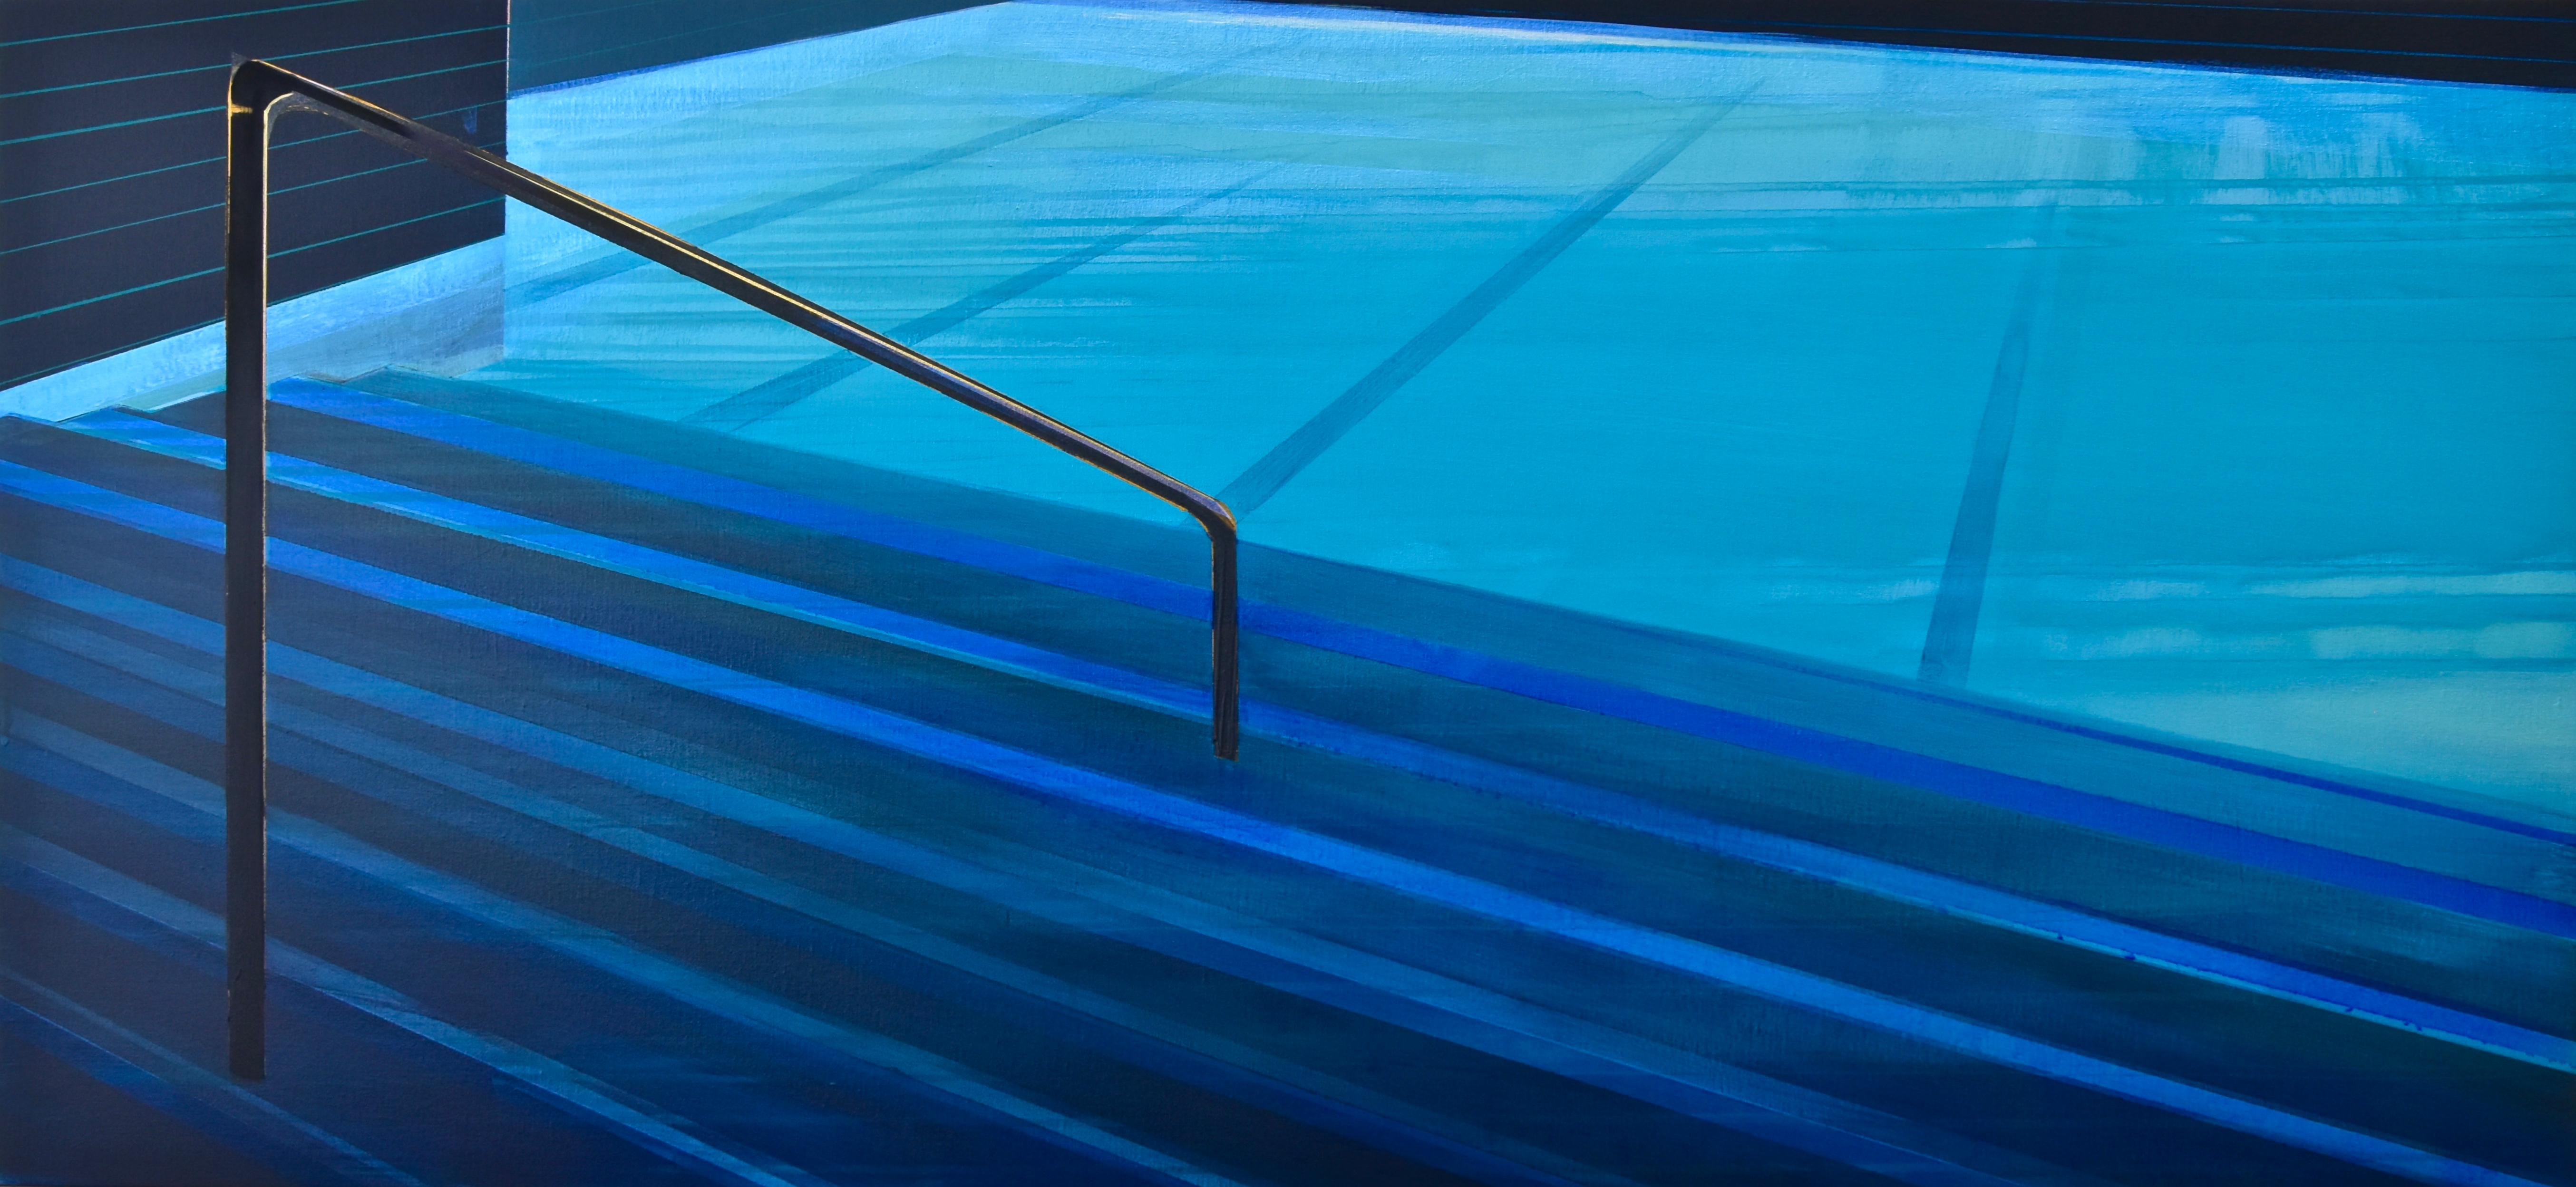 CÉCILE VAN HANJA Abstract Painting - Pool Reflections